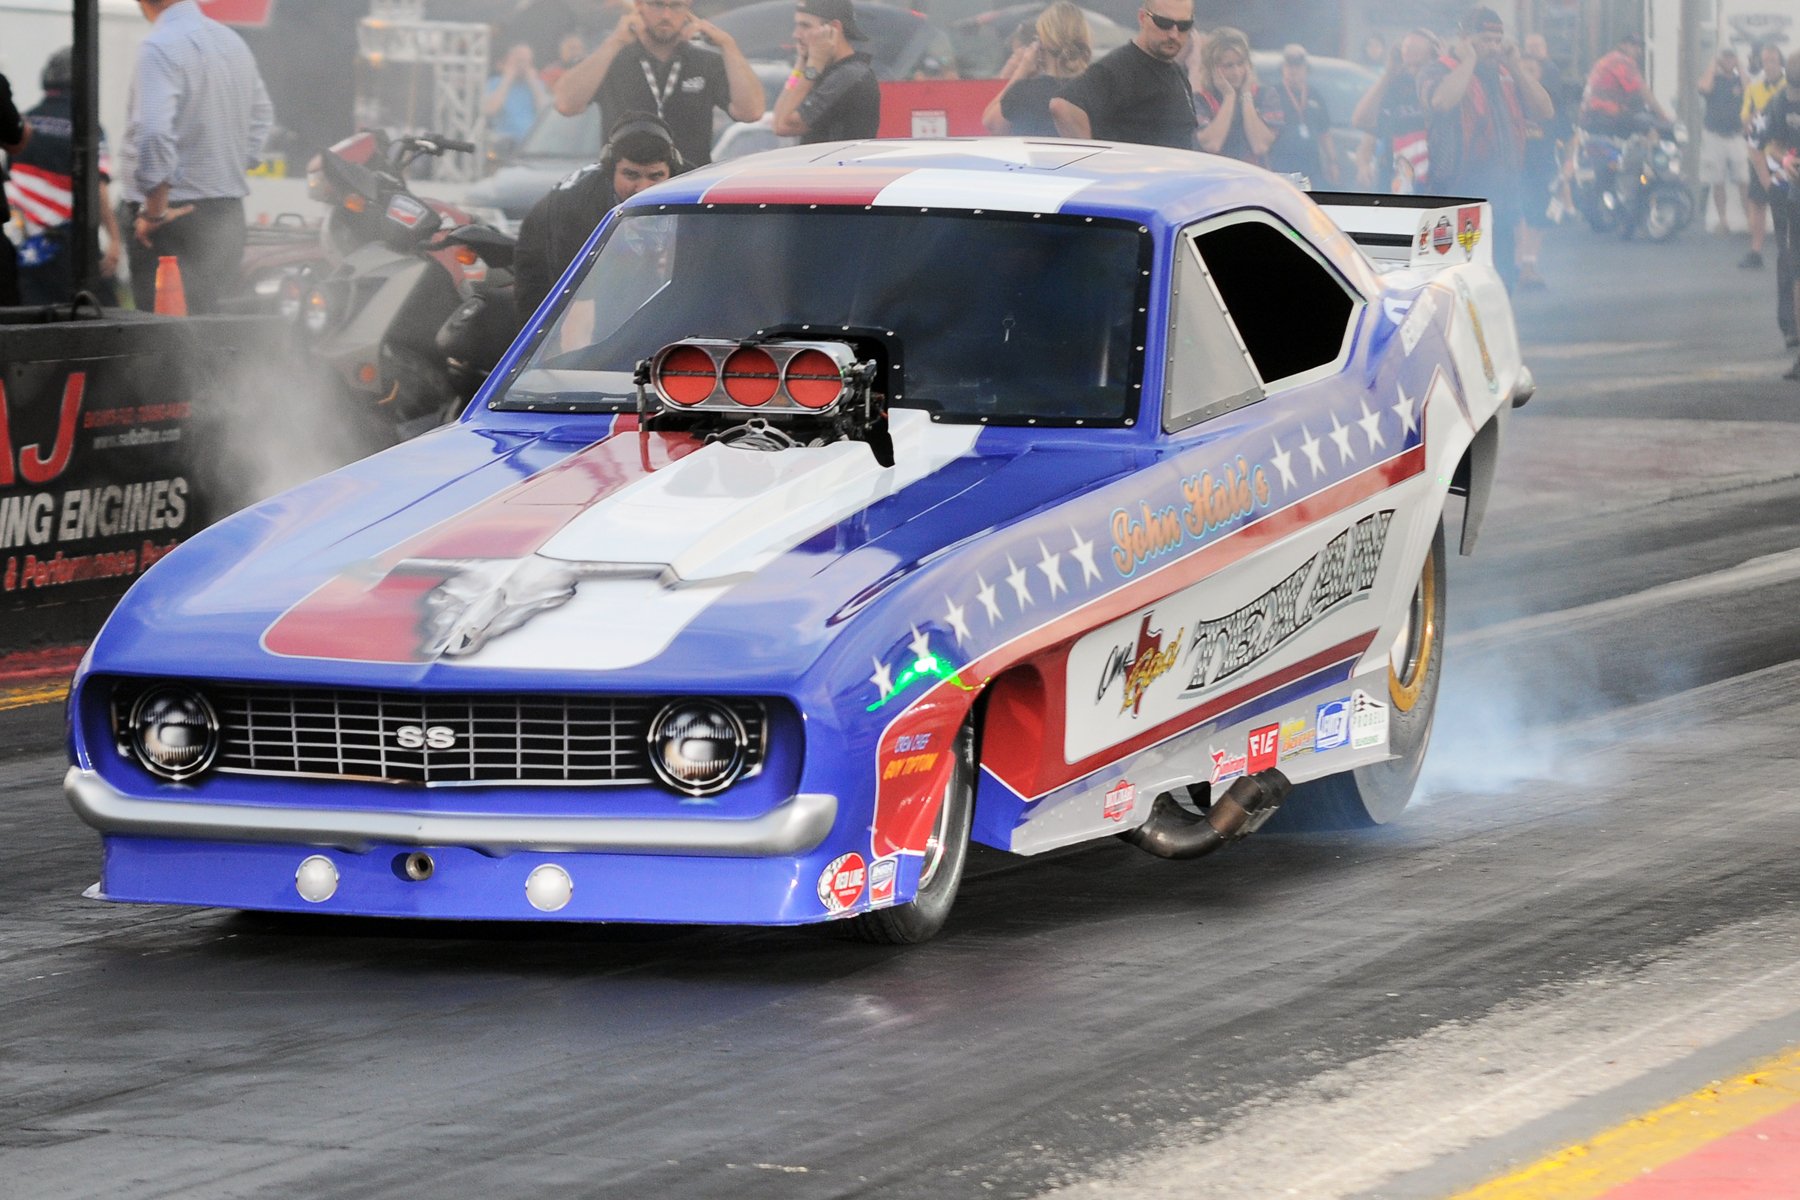 ihra, Drag, Racing, Race, Hot, Rod, Rods, Muscle, Funnycar, Funny, Chevrolet, Camaro Wallpaper